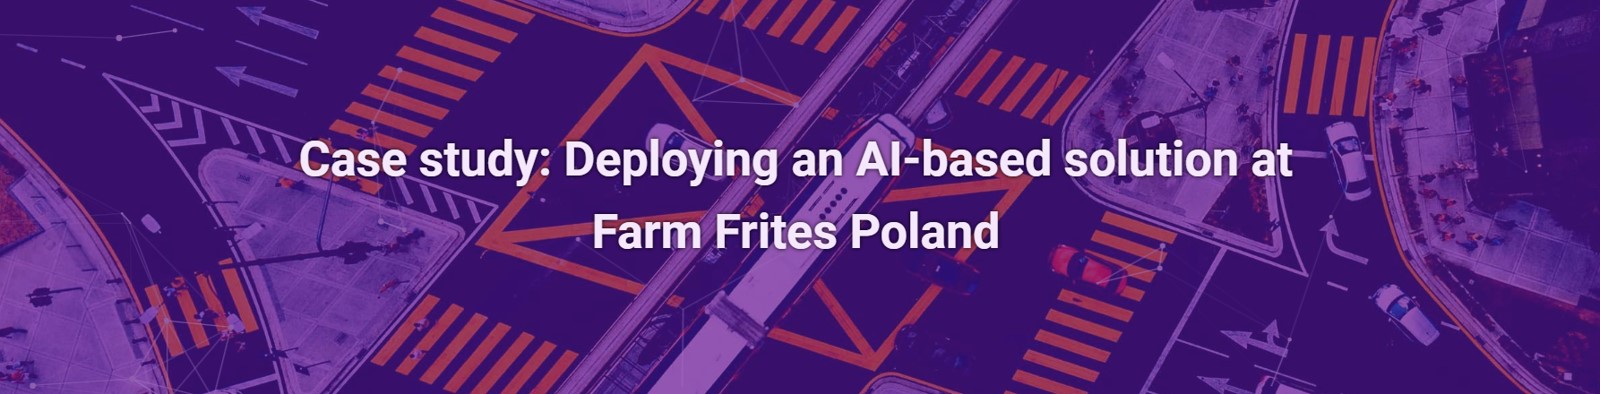 Case study: Deploying an AI-based solution at Farm Frites Poland